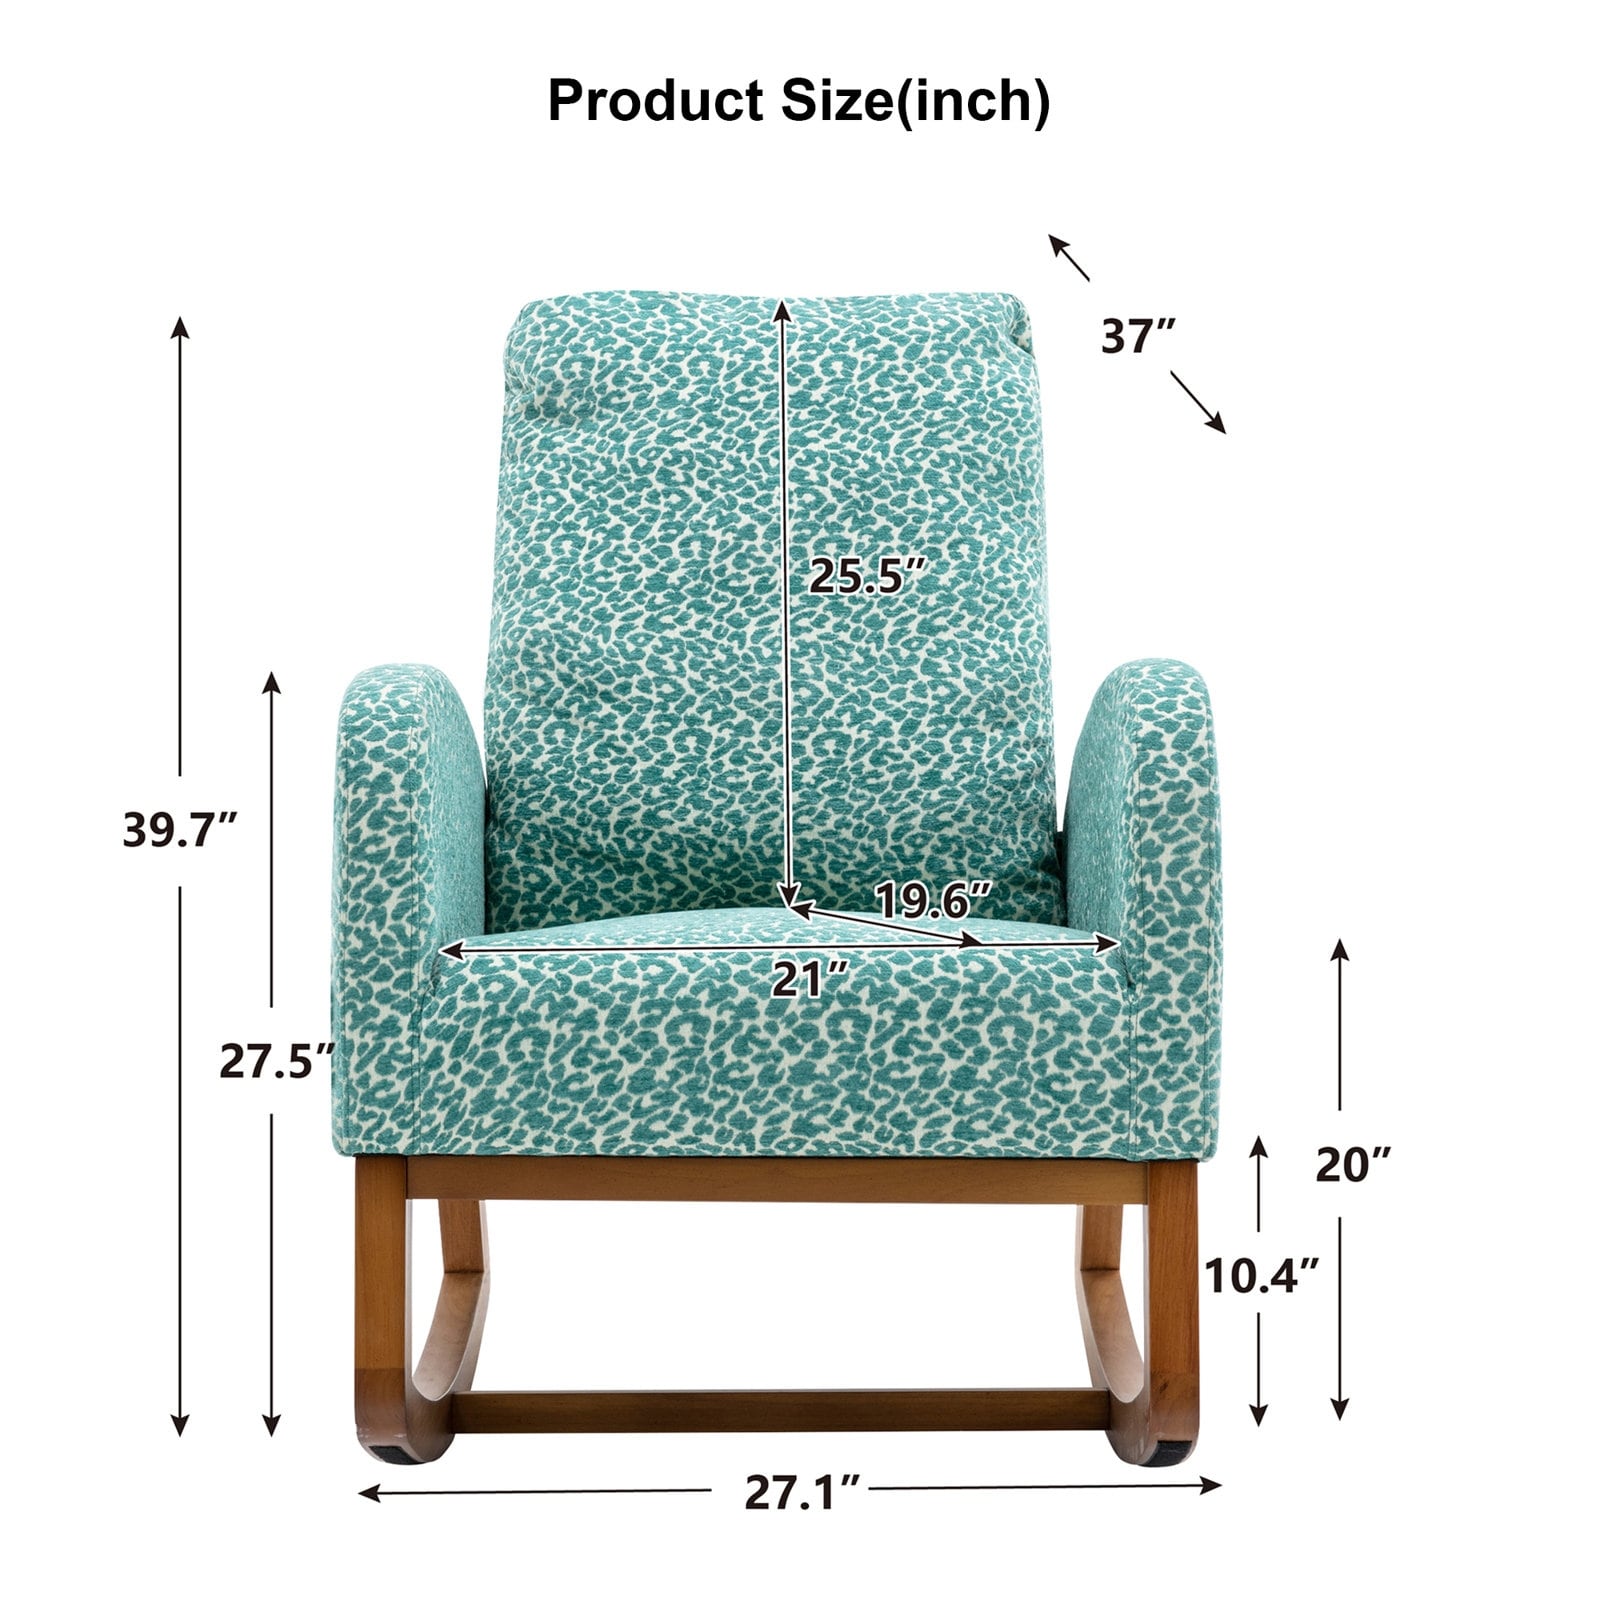 Comfortable Rocking Chair for Living Room with High Backrest and Cozy Armrest